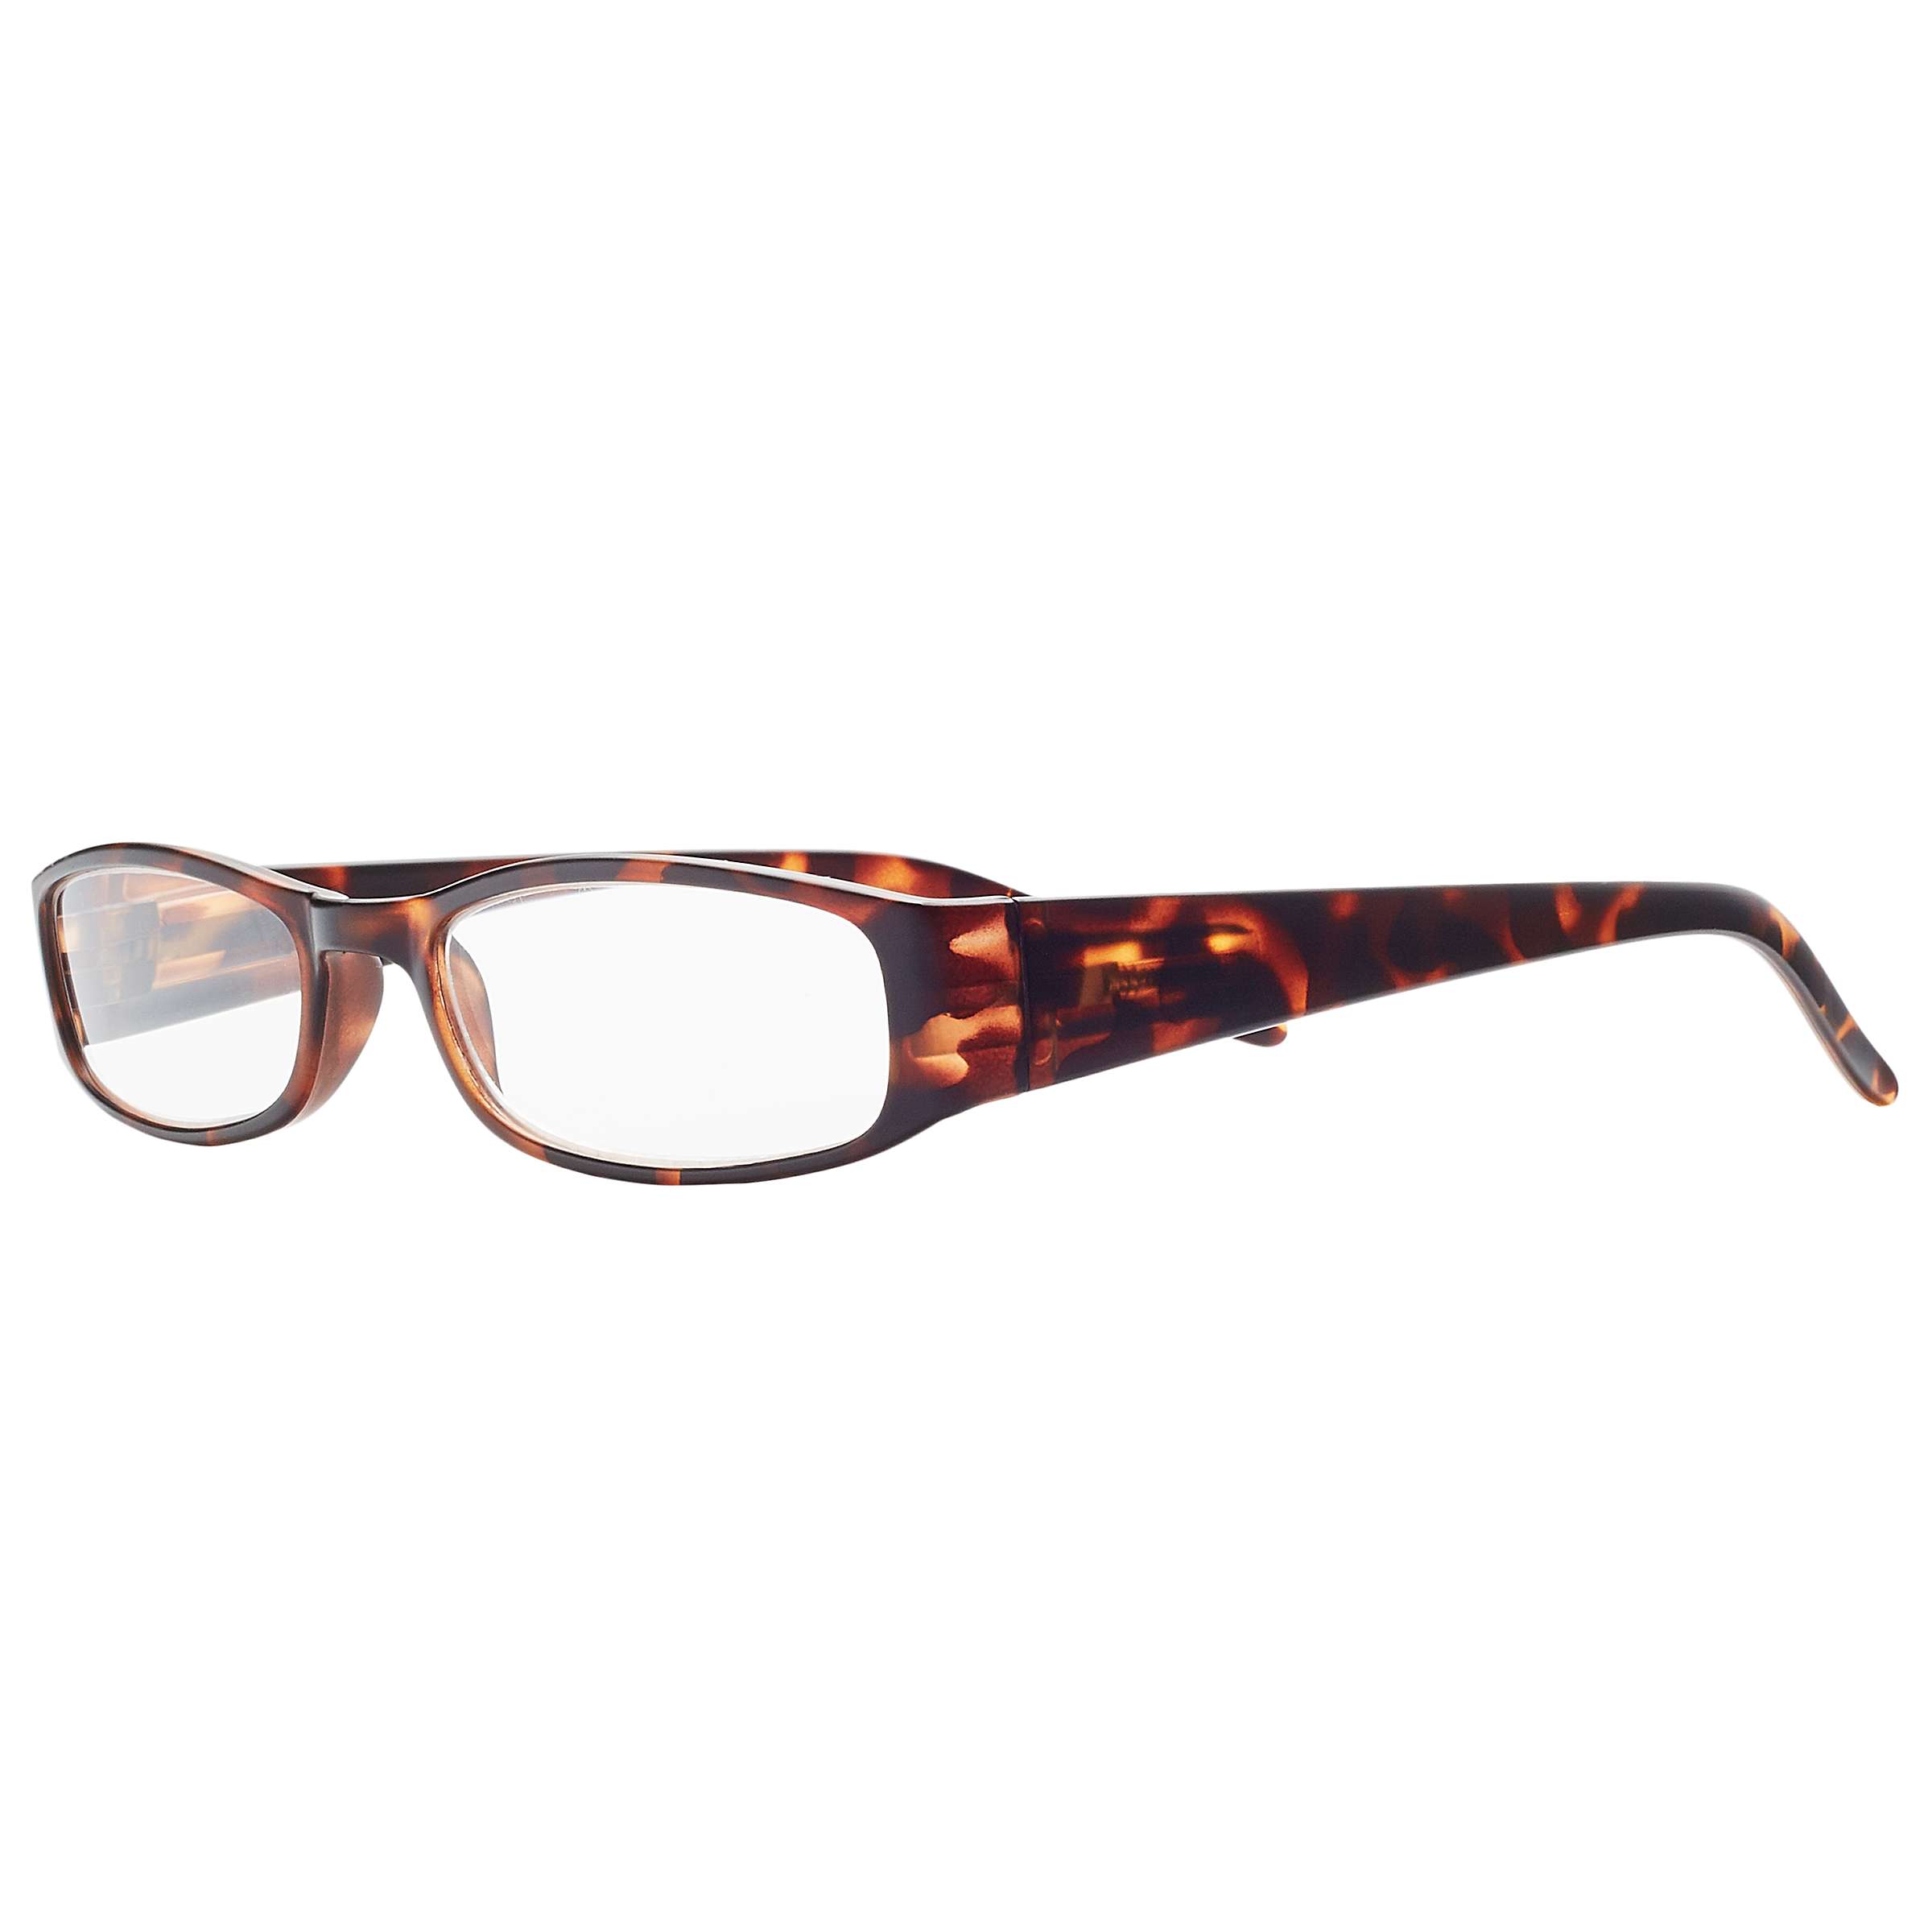 Buy Magnif Eyes Unisex Very Narrow Fit Ready Readers Boston Glasses Online at johnlewis.com